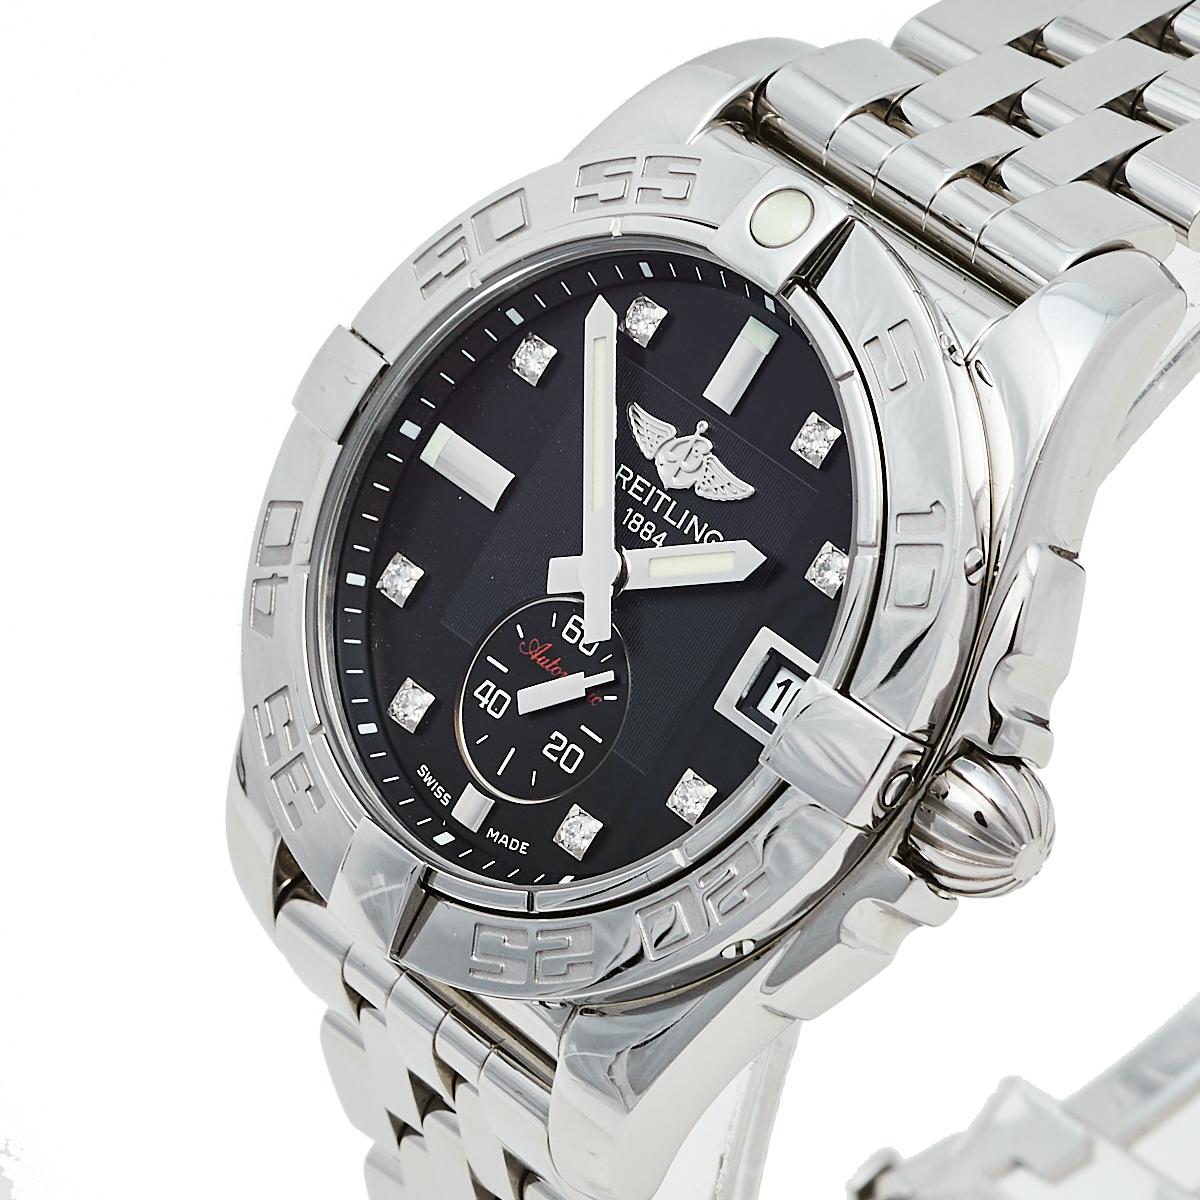 The classy elegance of this watch from the house of Breitling is showcased in its construction. Part of the Galactic collection, the watch is beautifully crafted from stainless steel. It features a black-colored dial with diamond hour markers, a